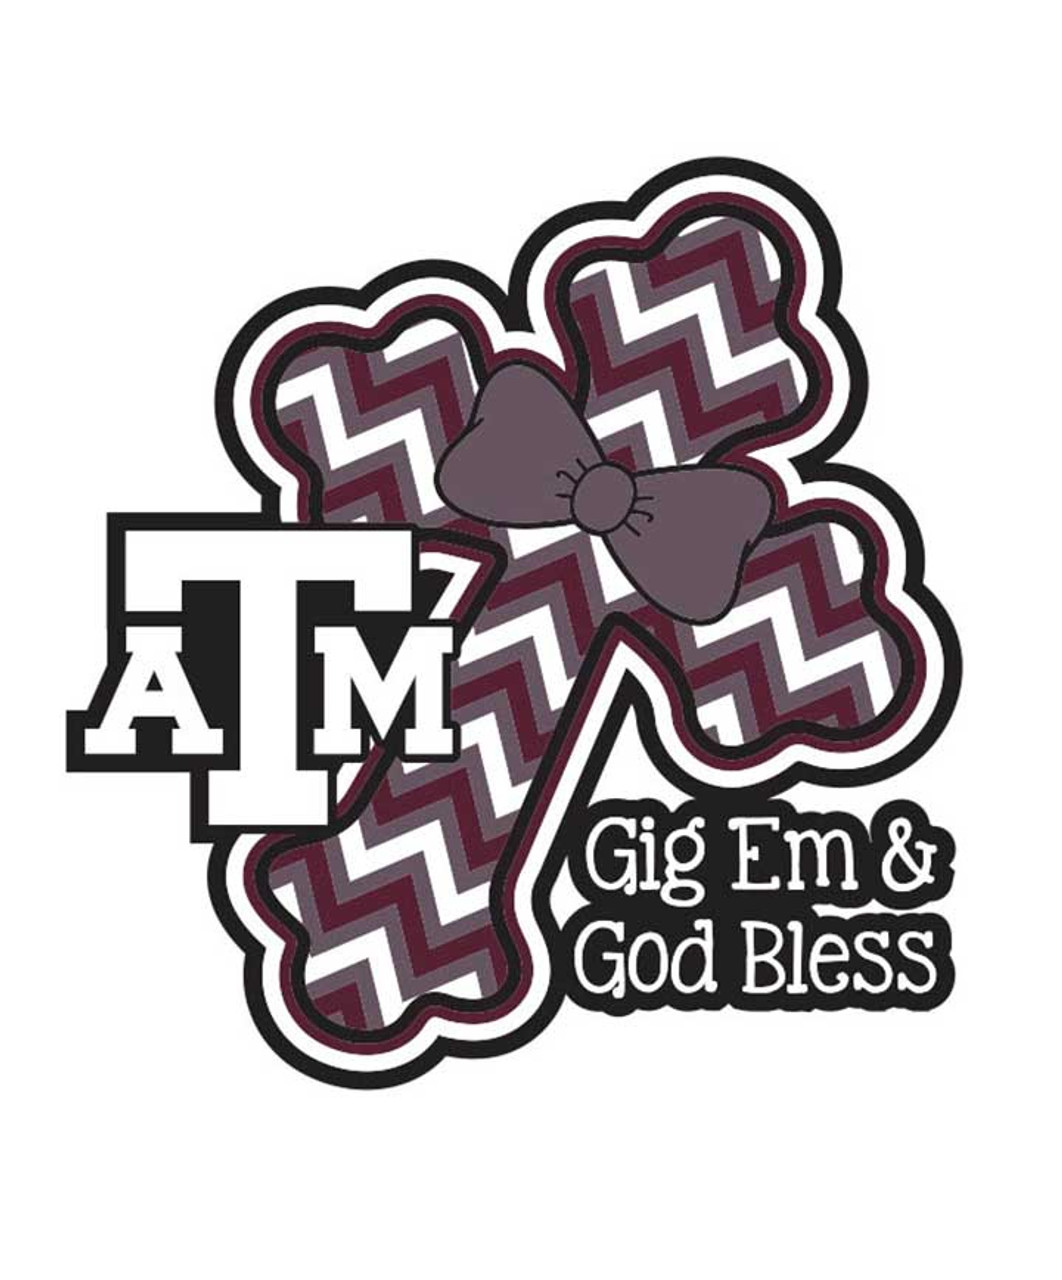 Texas A&M Aggies 5 x 5 Maroon, Black & White Gig 'Em & God Bless Cross  Decal - The Warehouse at C.C. Creations